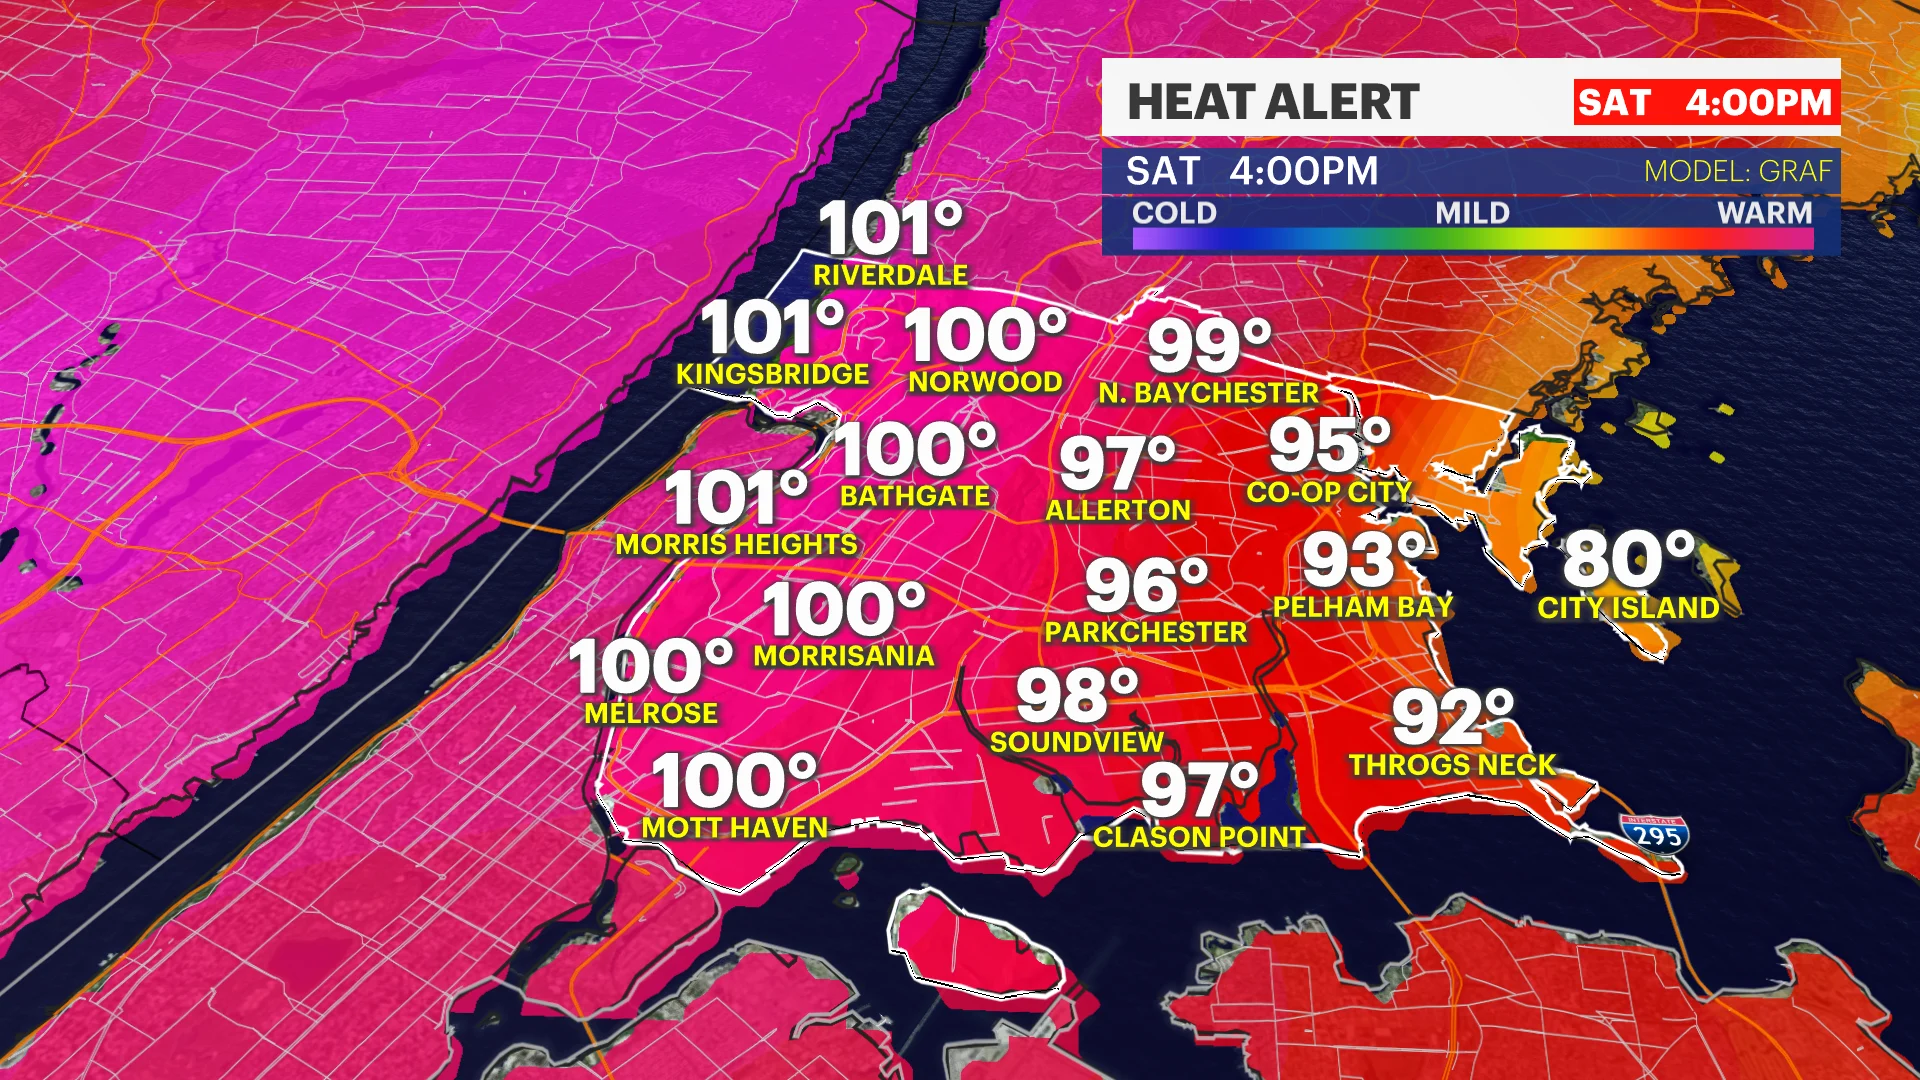 HEAT ALERT: Hazy conditions in the Bronx as temperatures approach 90s